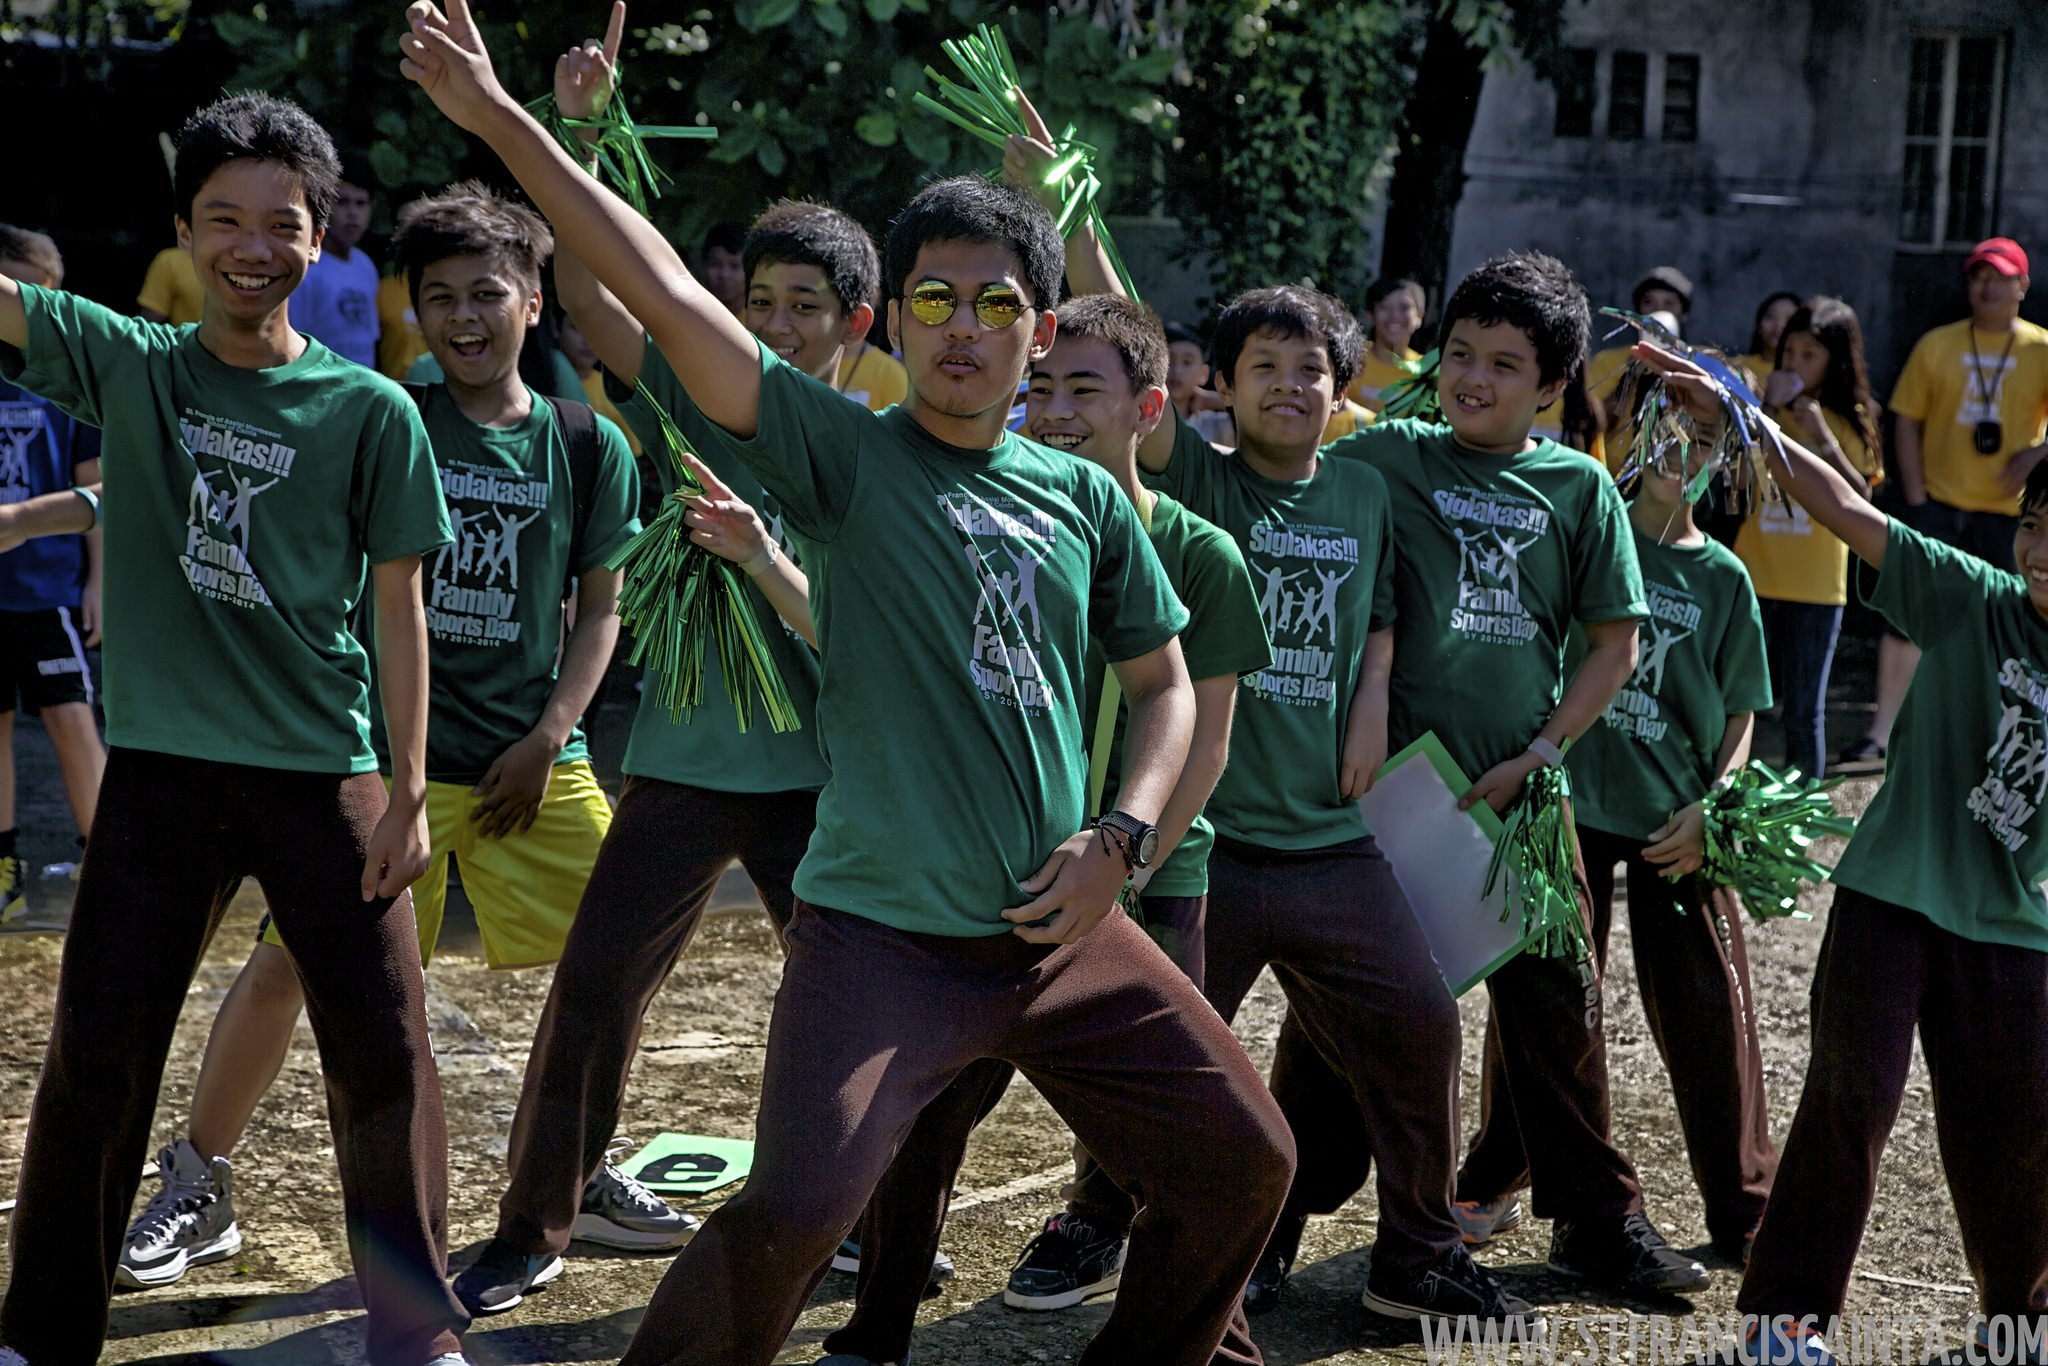 siglakas-opening-and-cheering-competition-sy-2013-2014_9995025075_o-X4.jpg